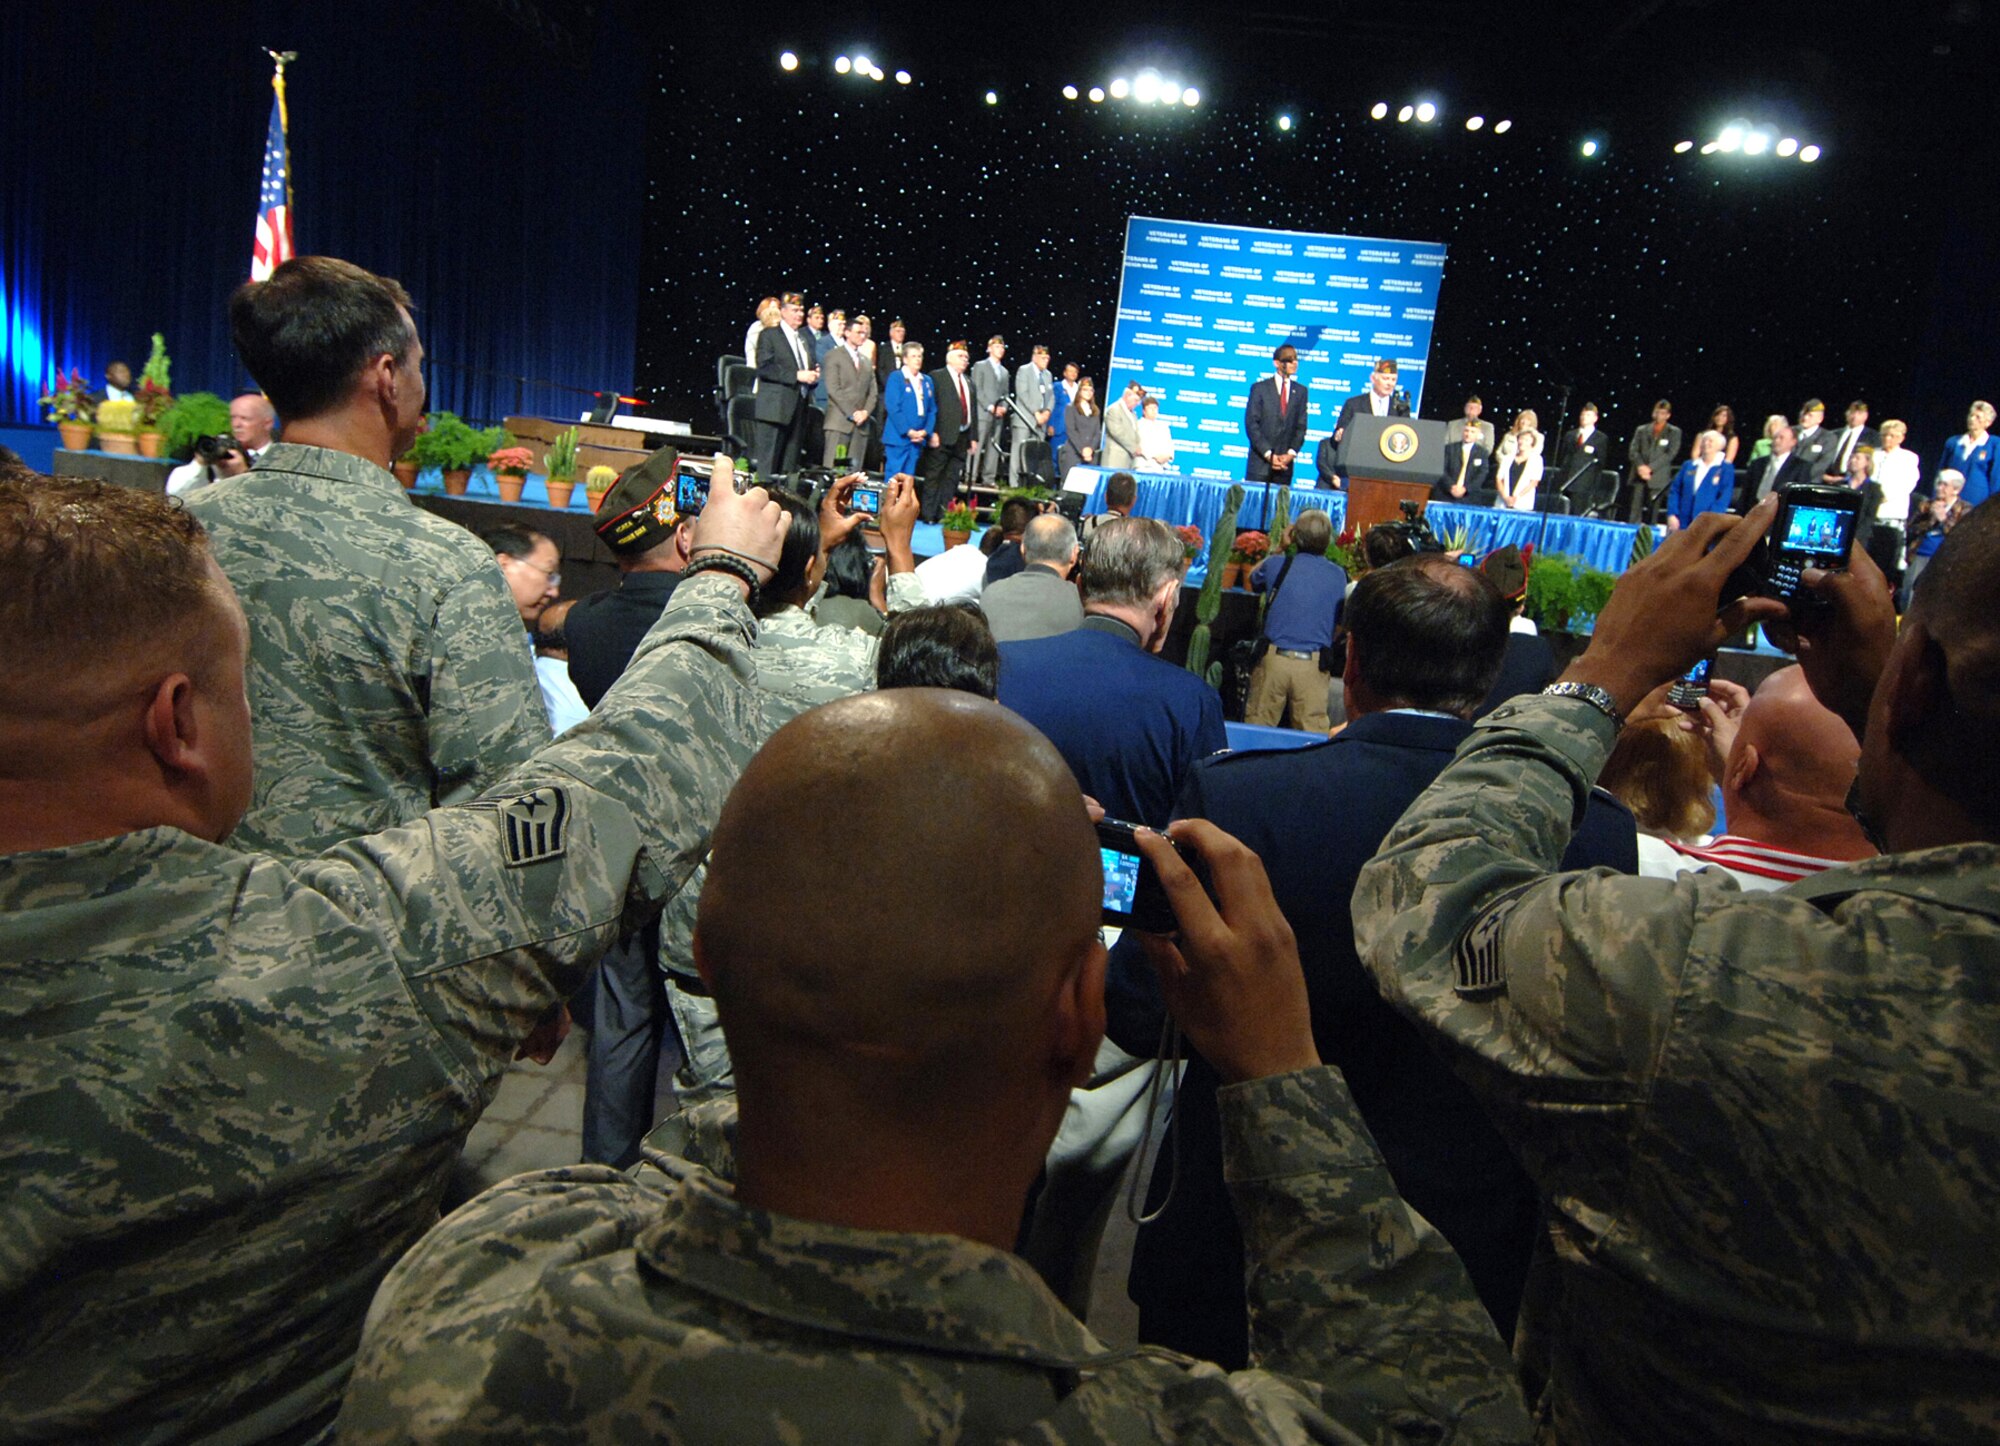 Airmen from Luke AFB, Ariz., hold up personal cameras in an attempt to photograph President Barak Obama at the 110th VFW National Convention at the Phoenix Convention Center.  (U.S. Air Force photo by Tech. Sgt. Jeffrey A. Wolfe)